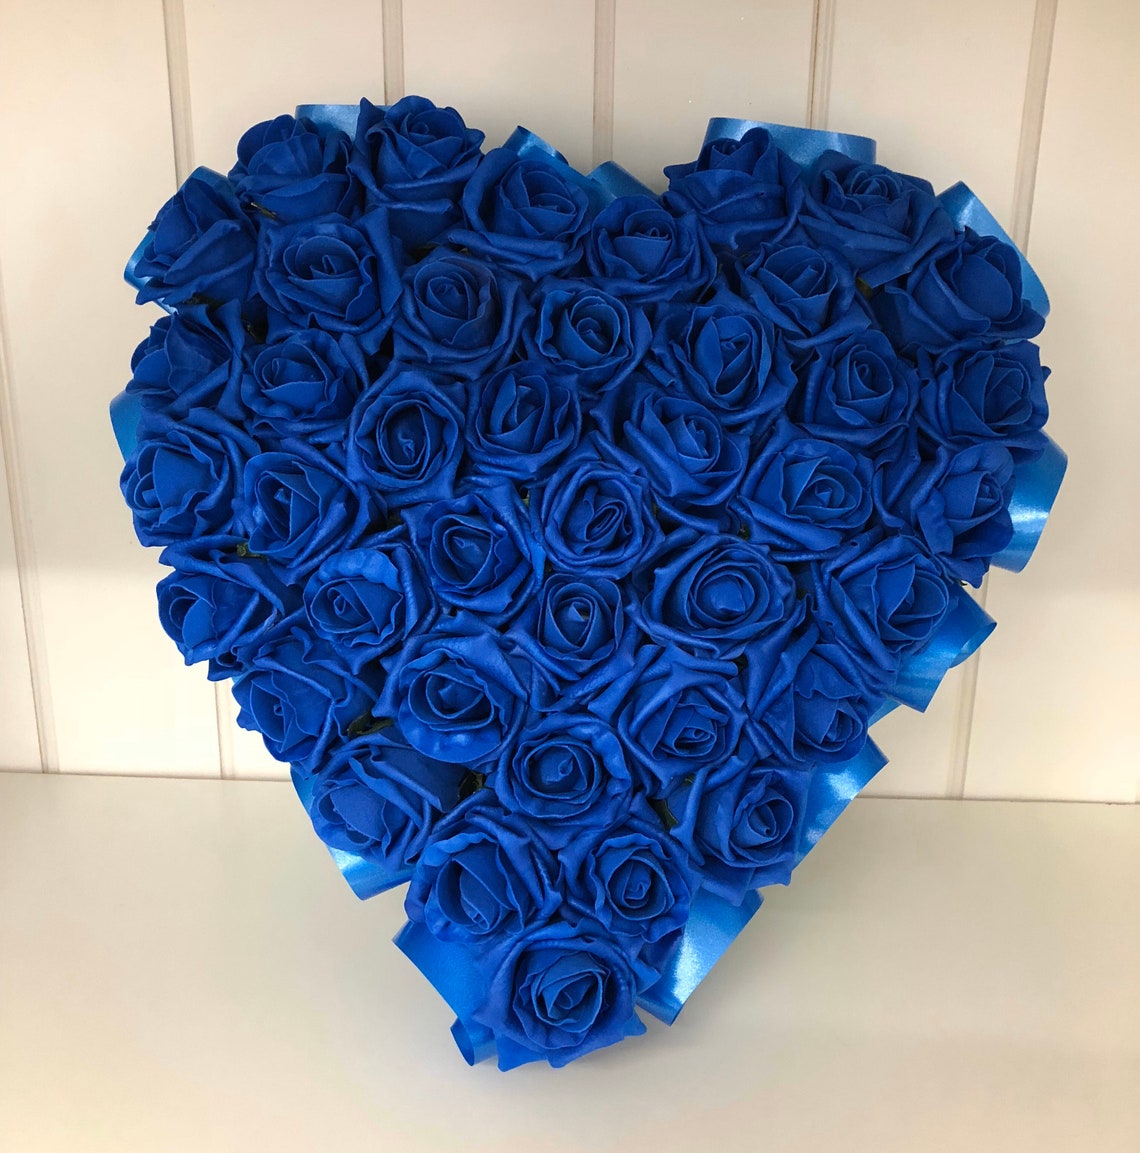 Royal Blue Rose Heart Wreath Artificial Flowers funeral | Etsy